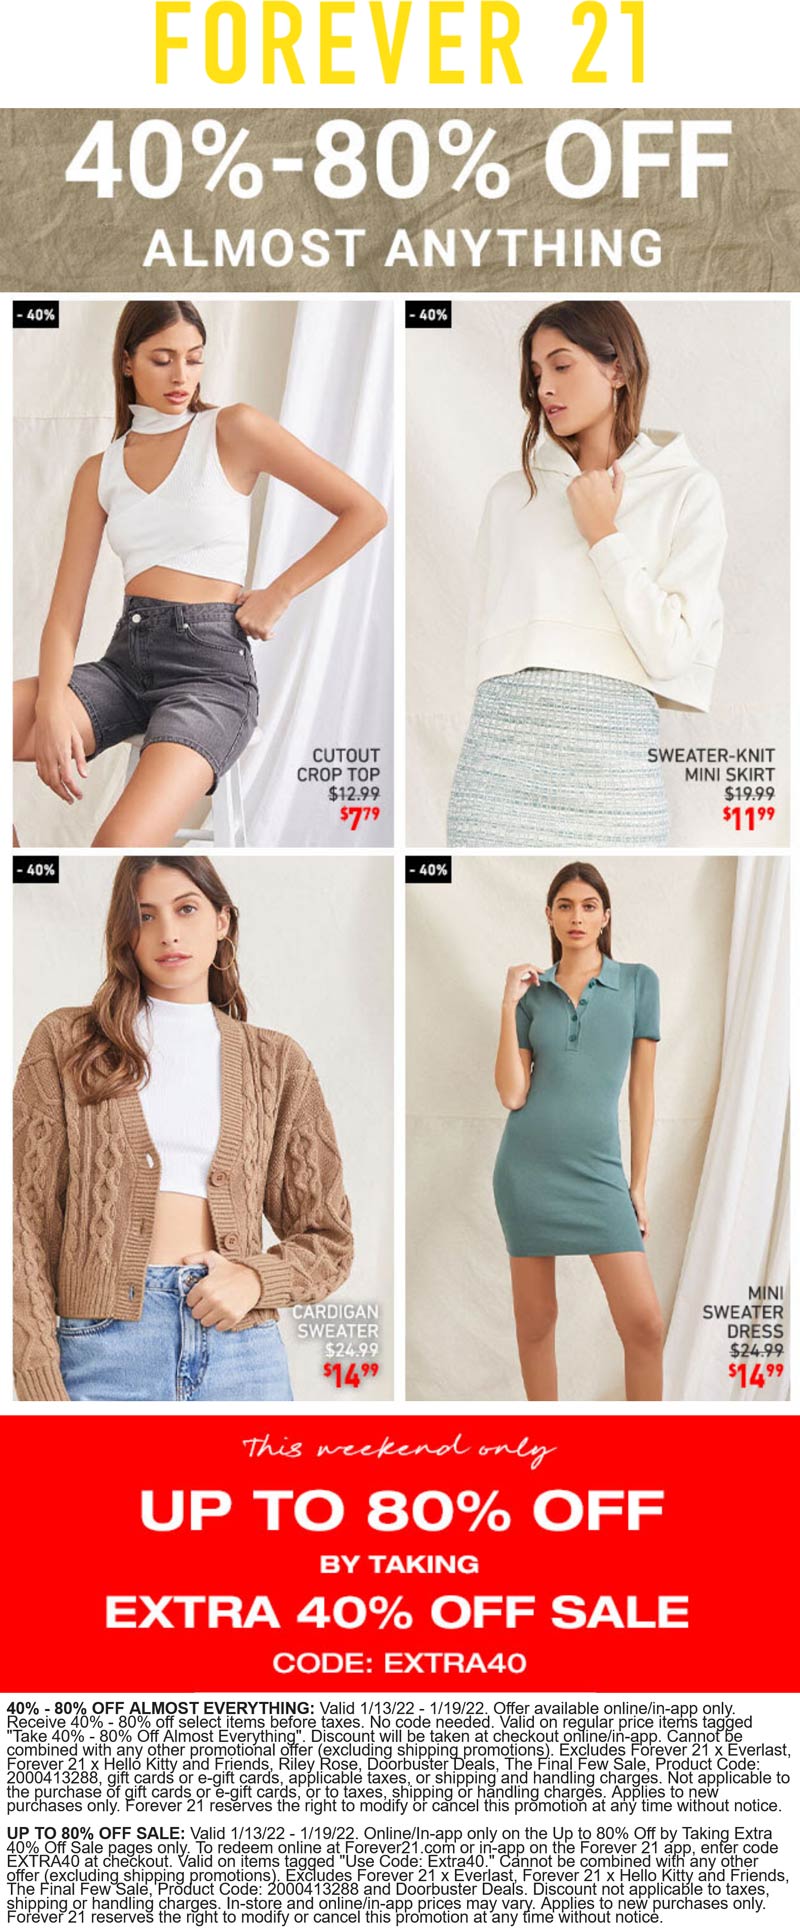 Forever 21 stores Coupon  Extra 40-80% off at Forever 21 via promo code EXTRA40 #forever21 